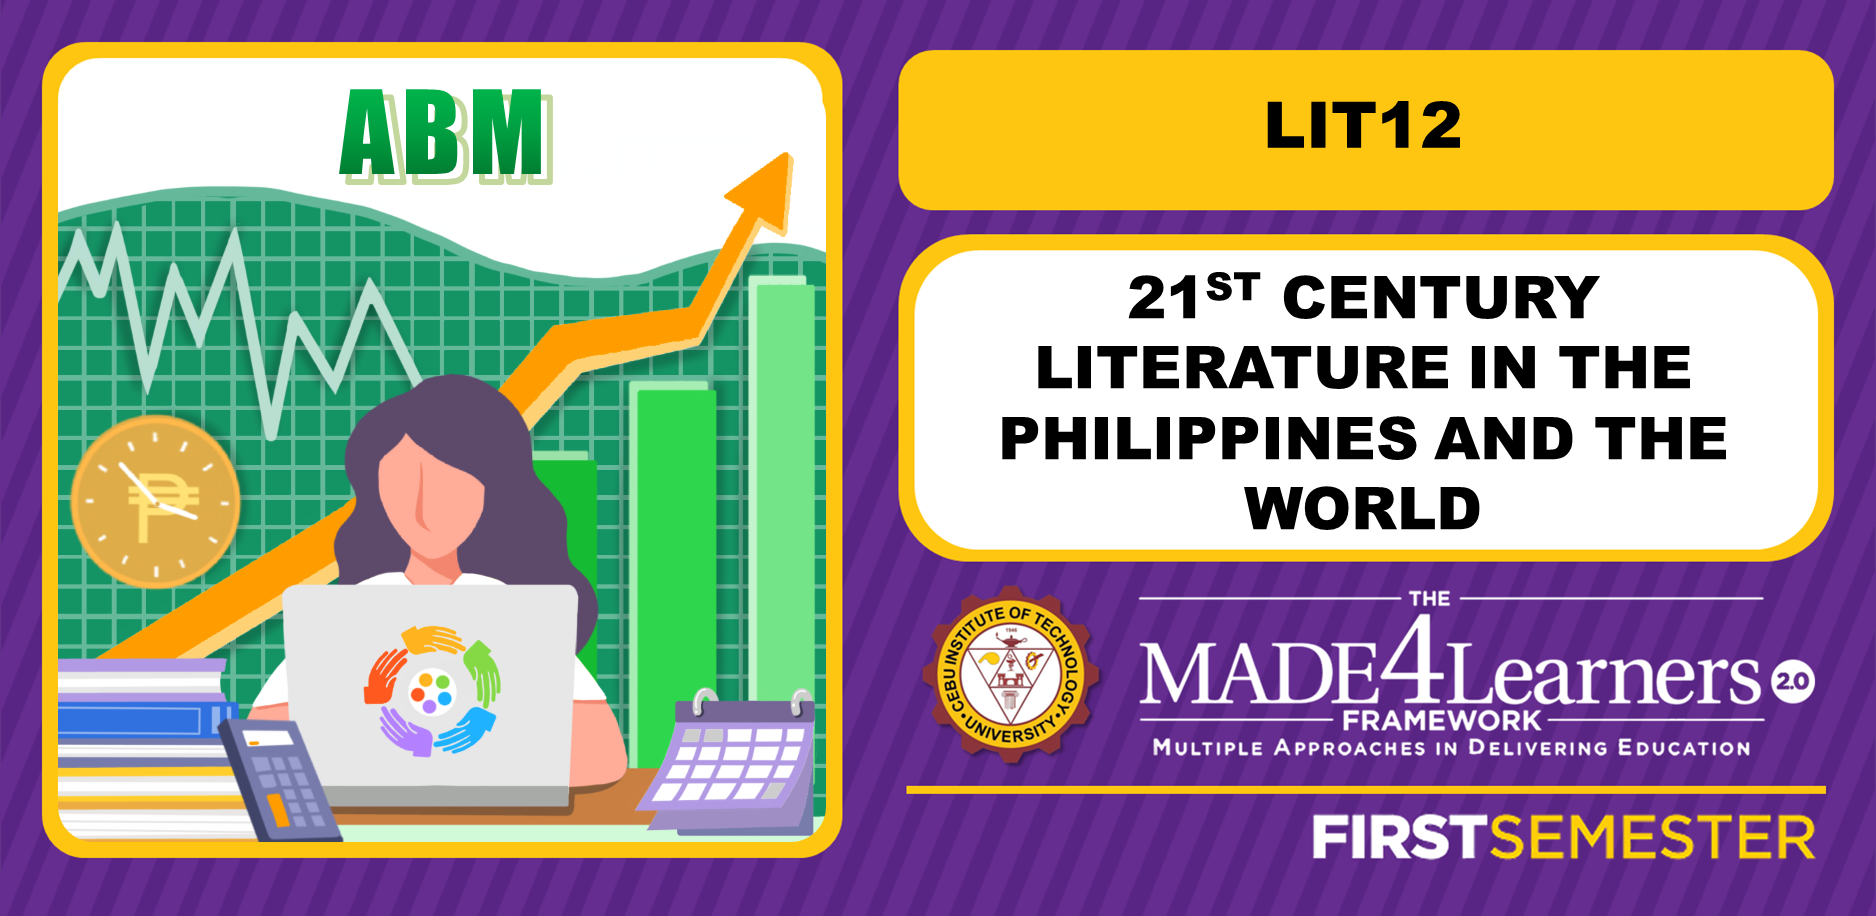 LIT12: 21st Century Literature from the Philippines and the World (Lanit)